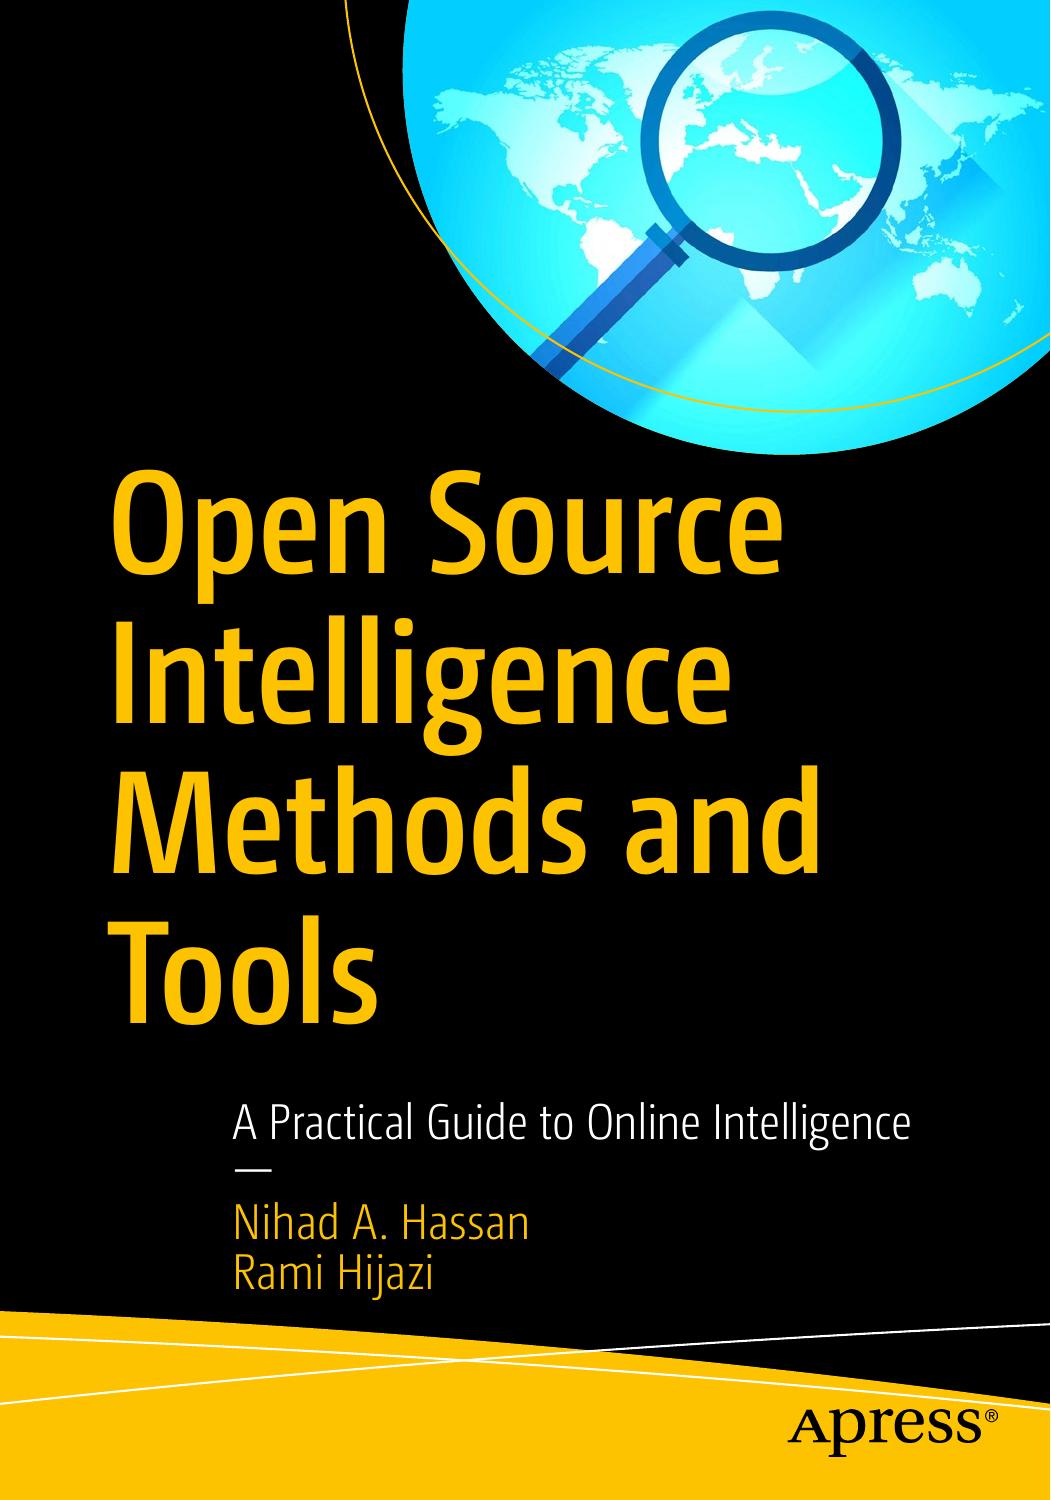 Open Source Intelligence Methods and Tools A Practical Guide to Online Intelligence ( PDFDrive ) 2018